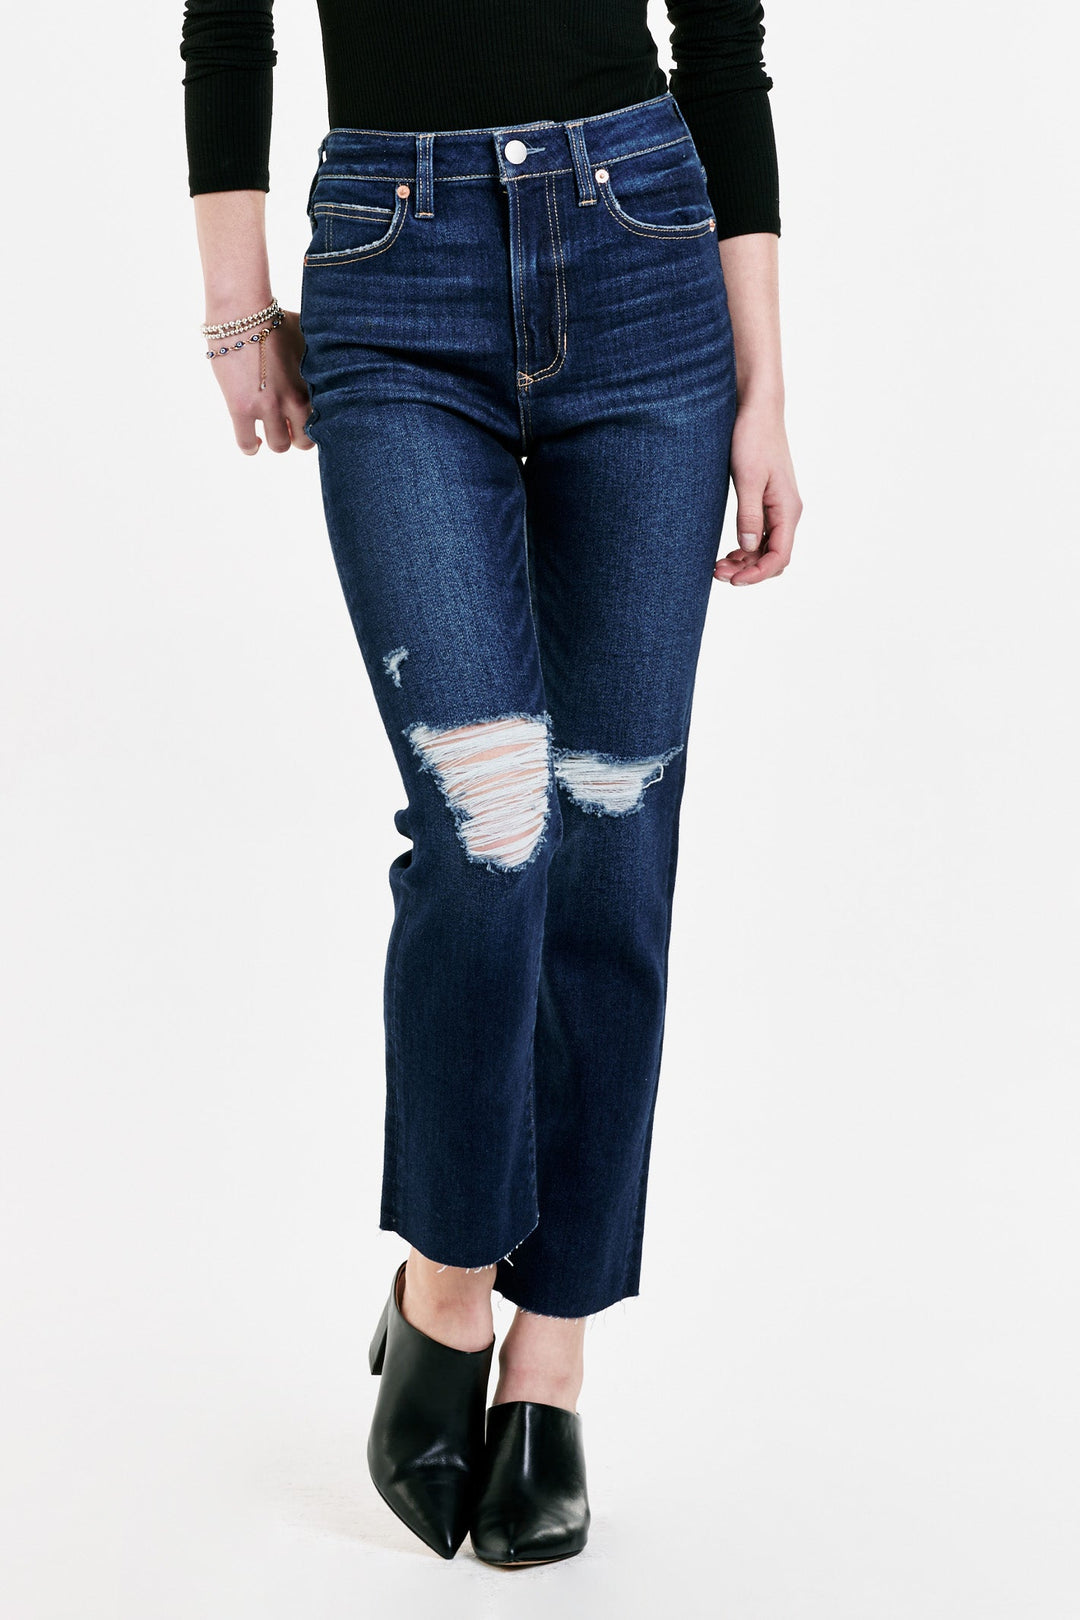 image of a female model wearing a FRANKIE SUPER HIGH RISE CROPPED STRAIGHT JEANS GALVIE DEAR JOHN DENIM 